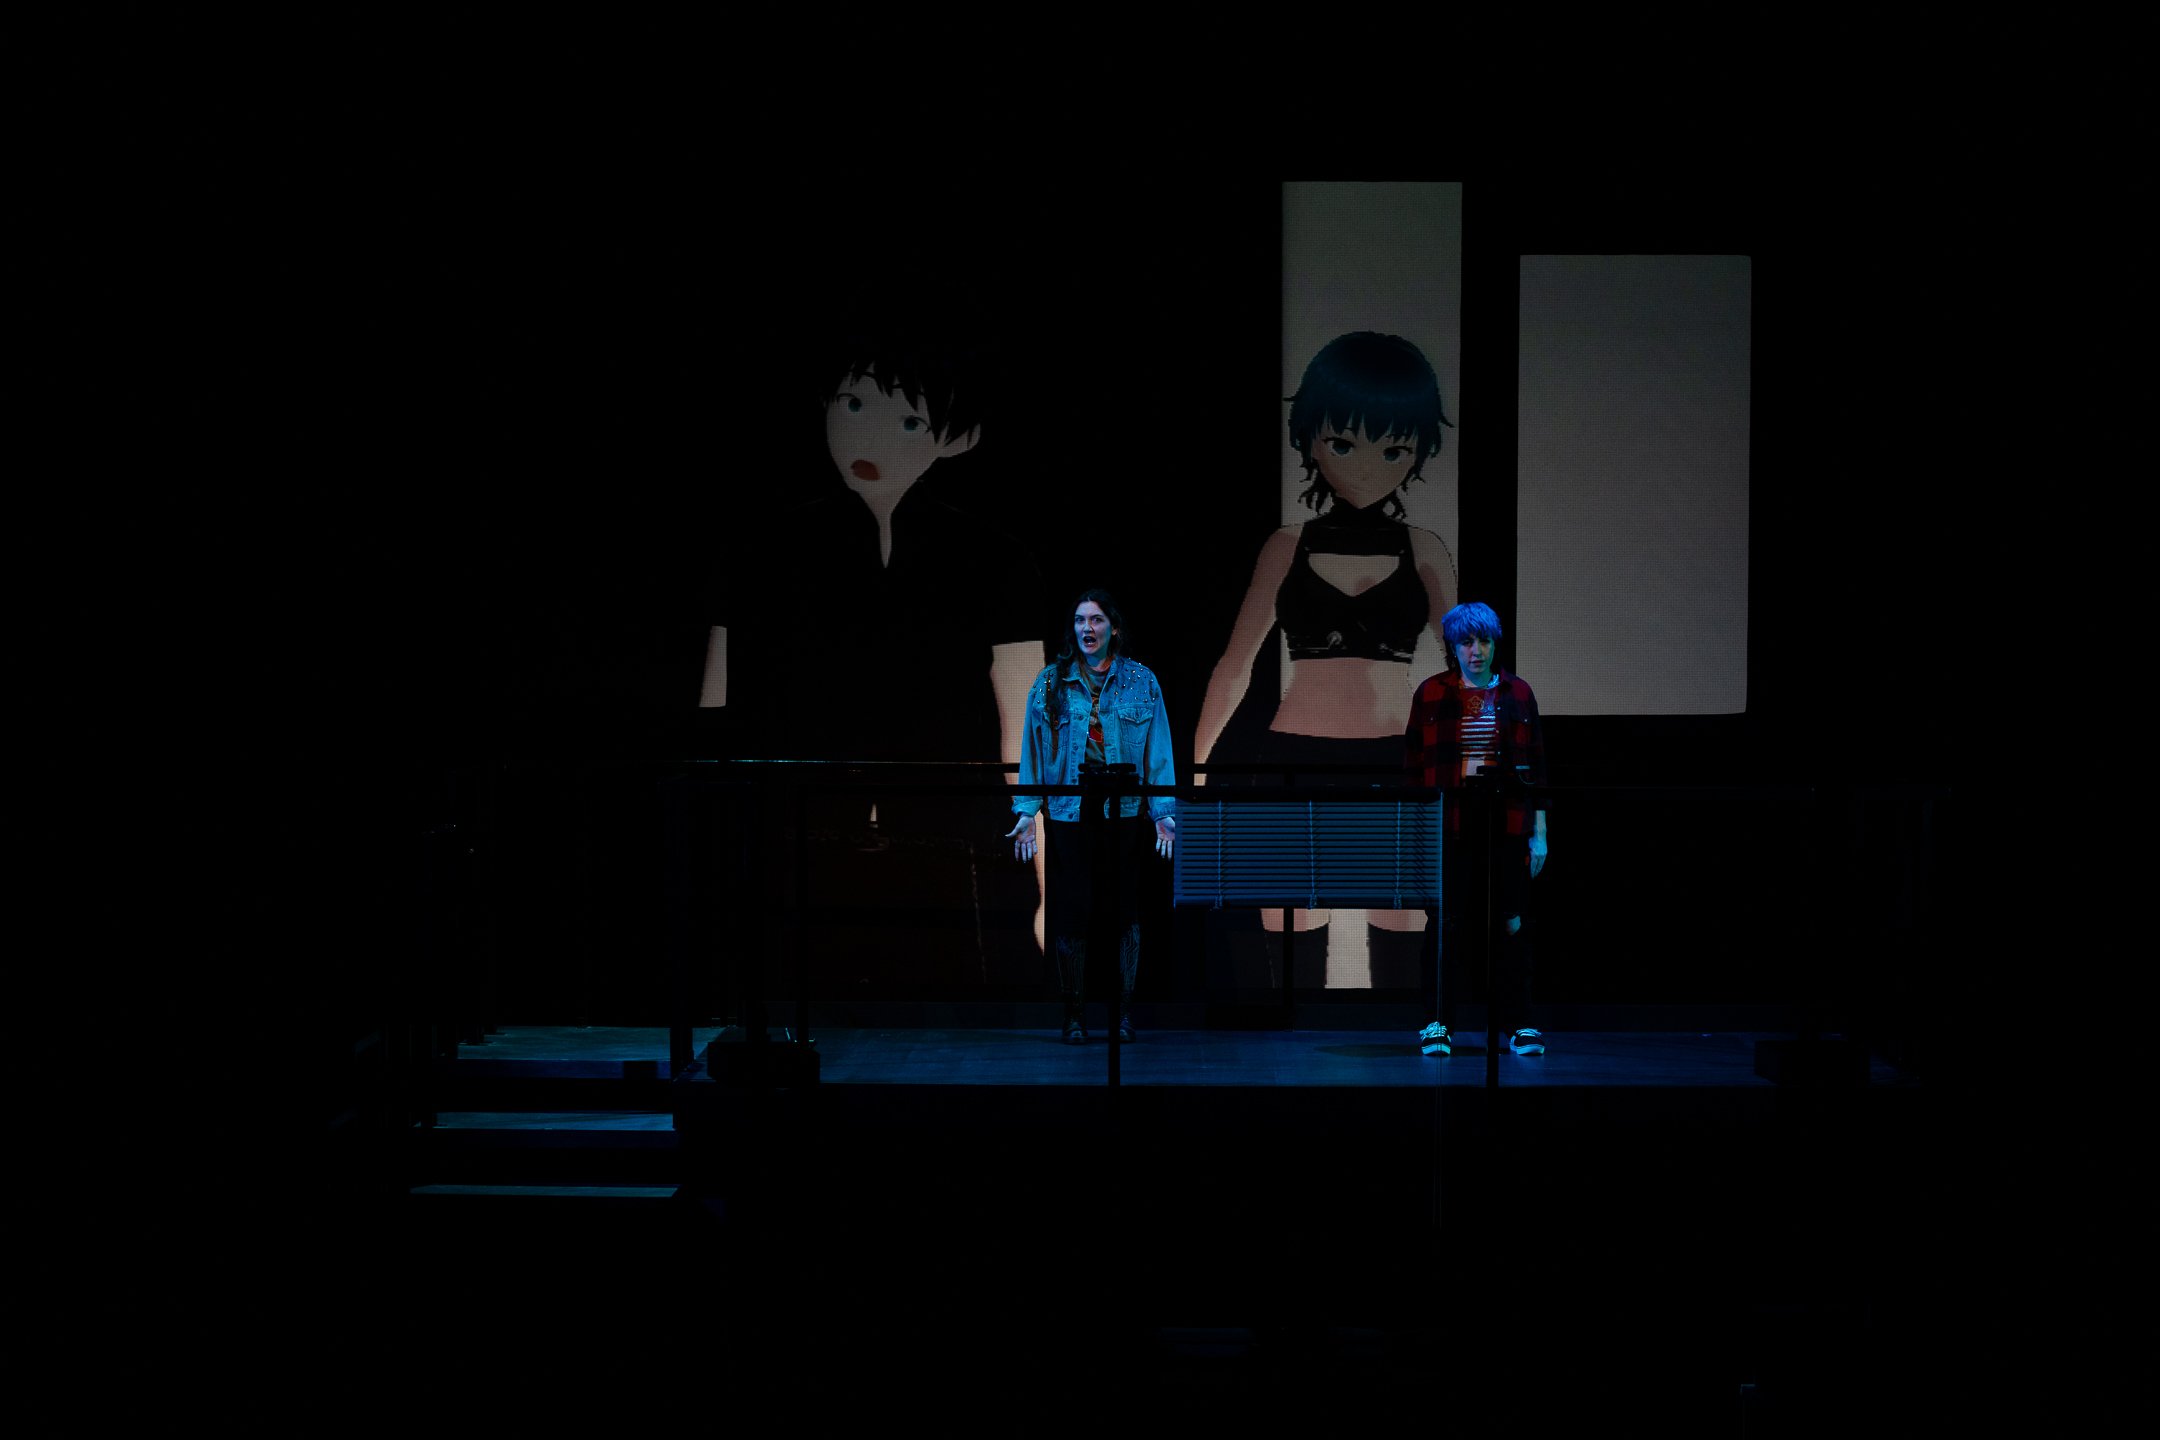 Each partner became an anime-esque being, projected on the screens around the room.